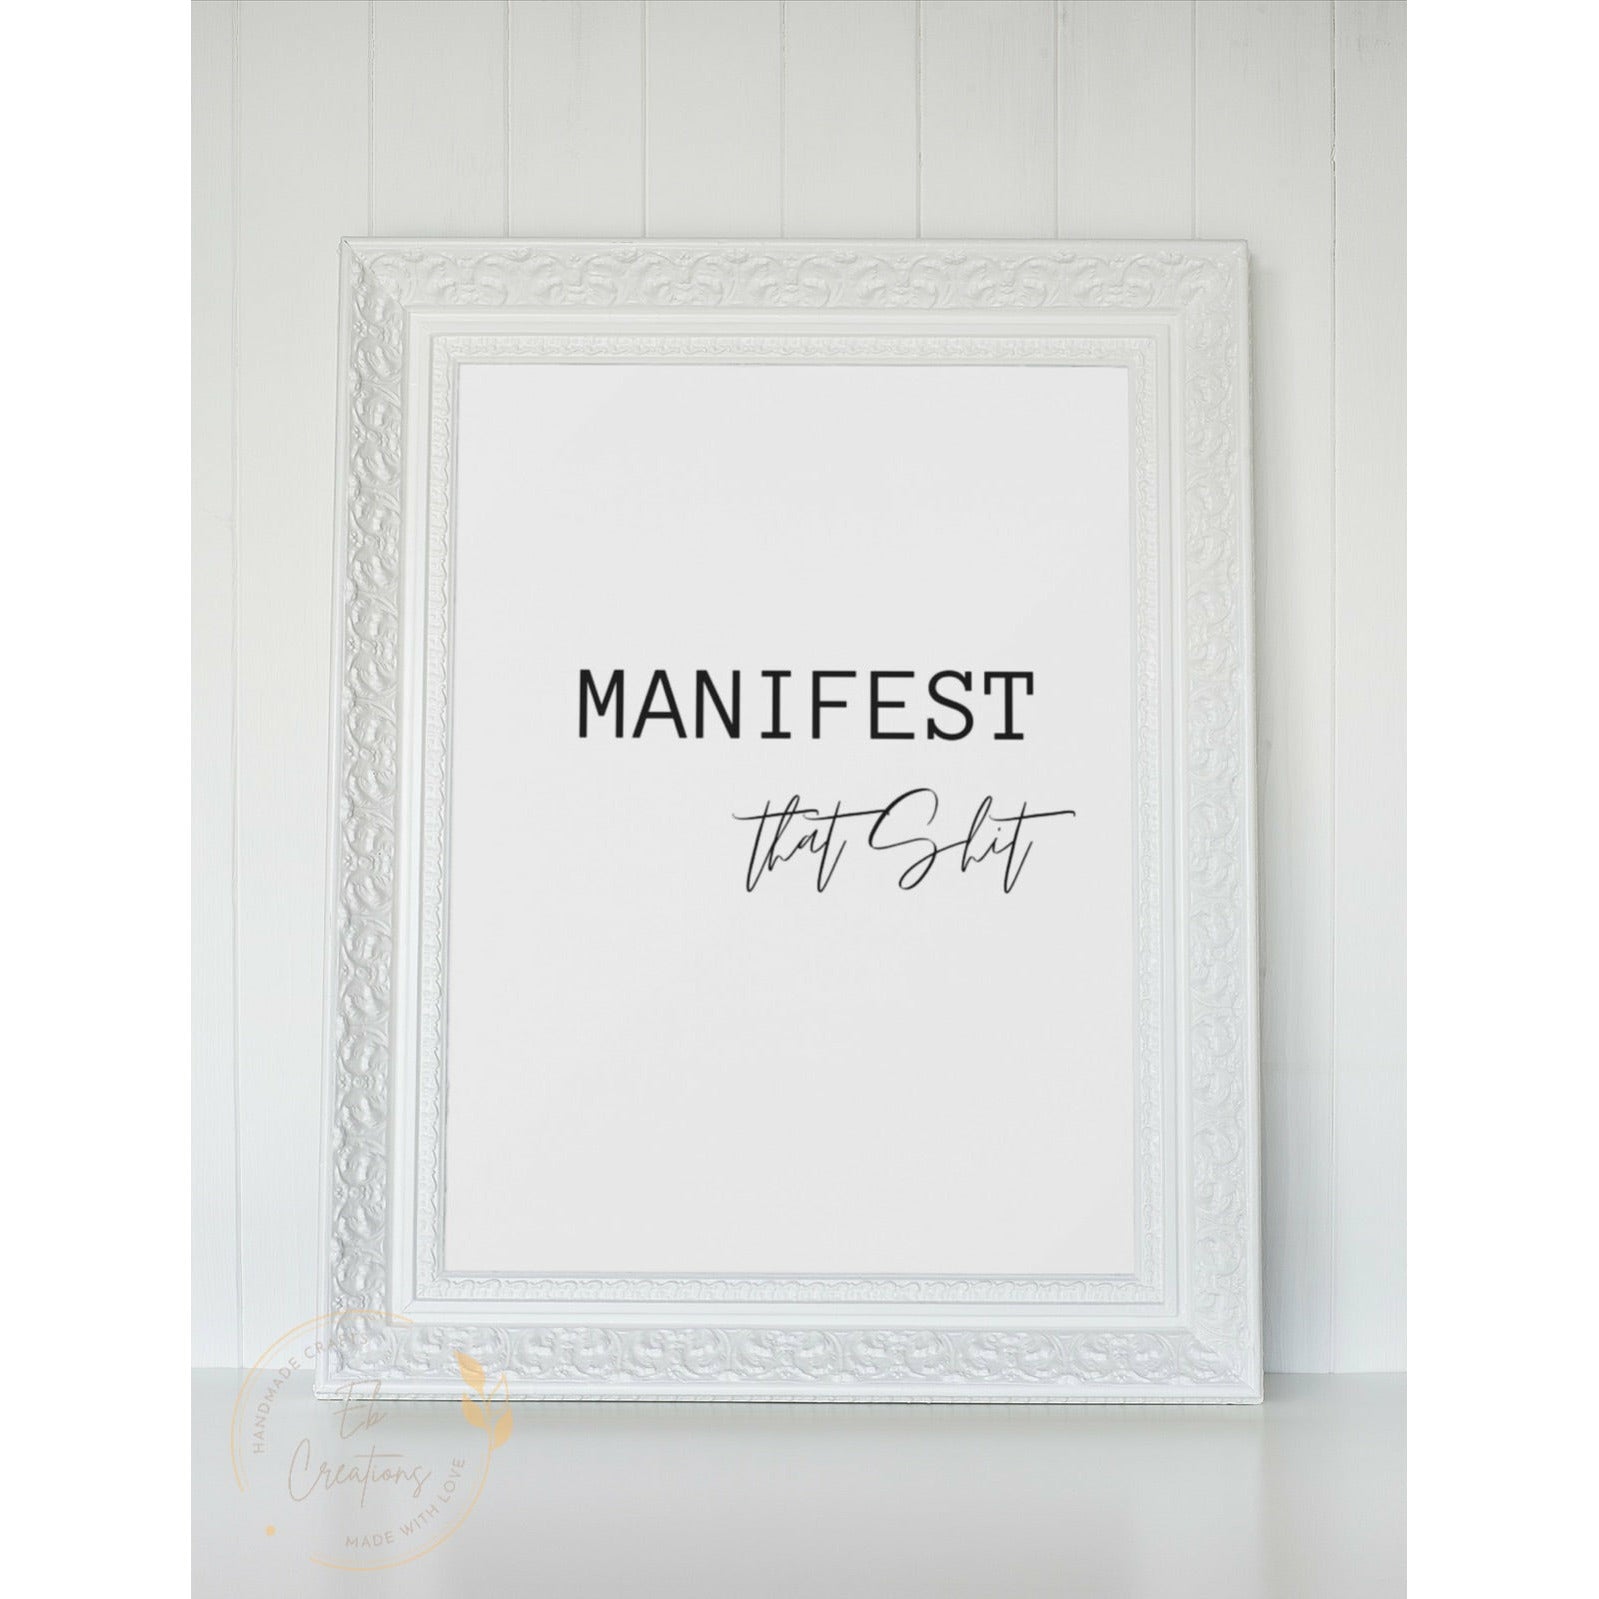 Manifest that shit | Motivational Quote | Wall Art - Eb Creations Posters, Prints, & Visual Artwork Manifest that shit | Motivational Quote | Wall Art